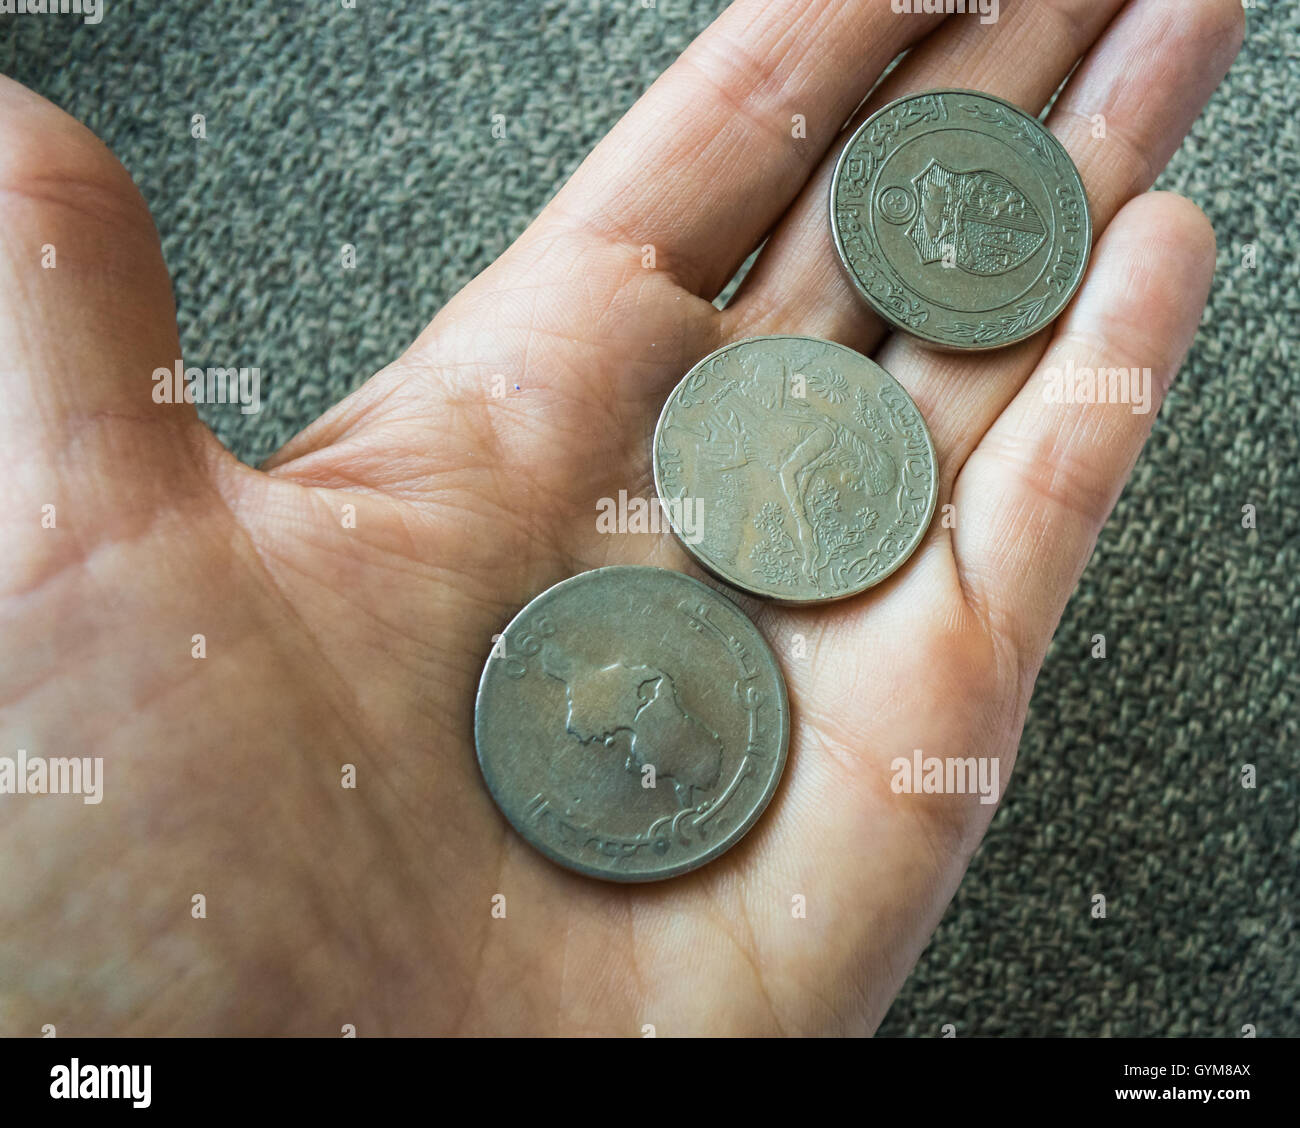 Three Tunisian coins on the woman's palm Stock Photo